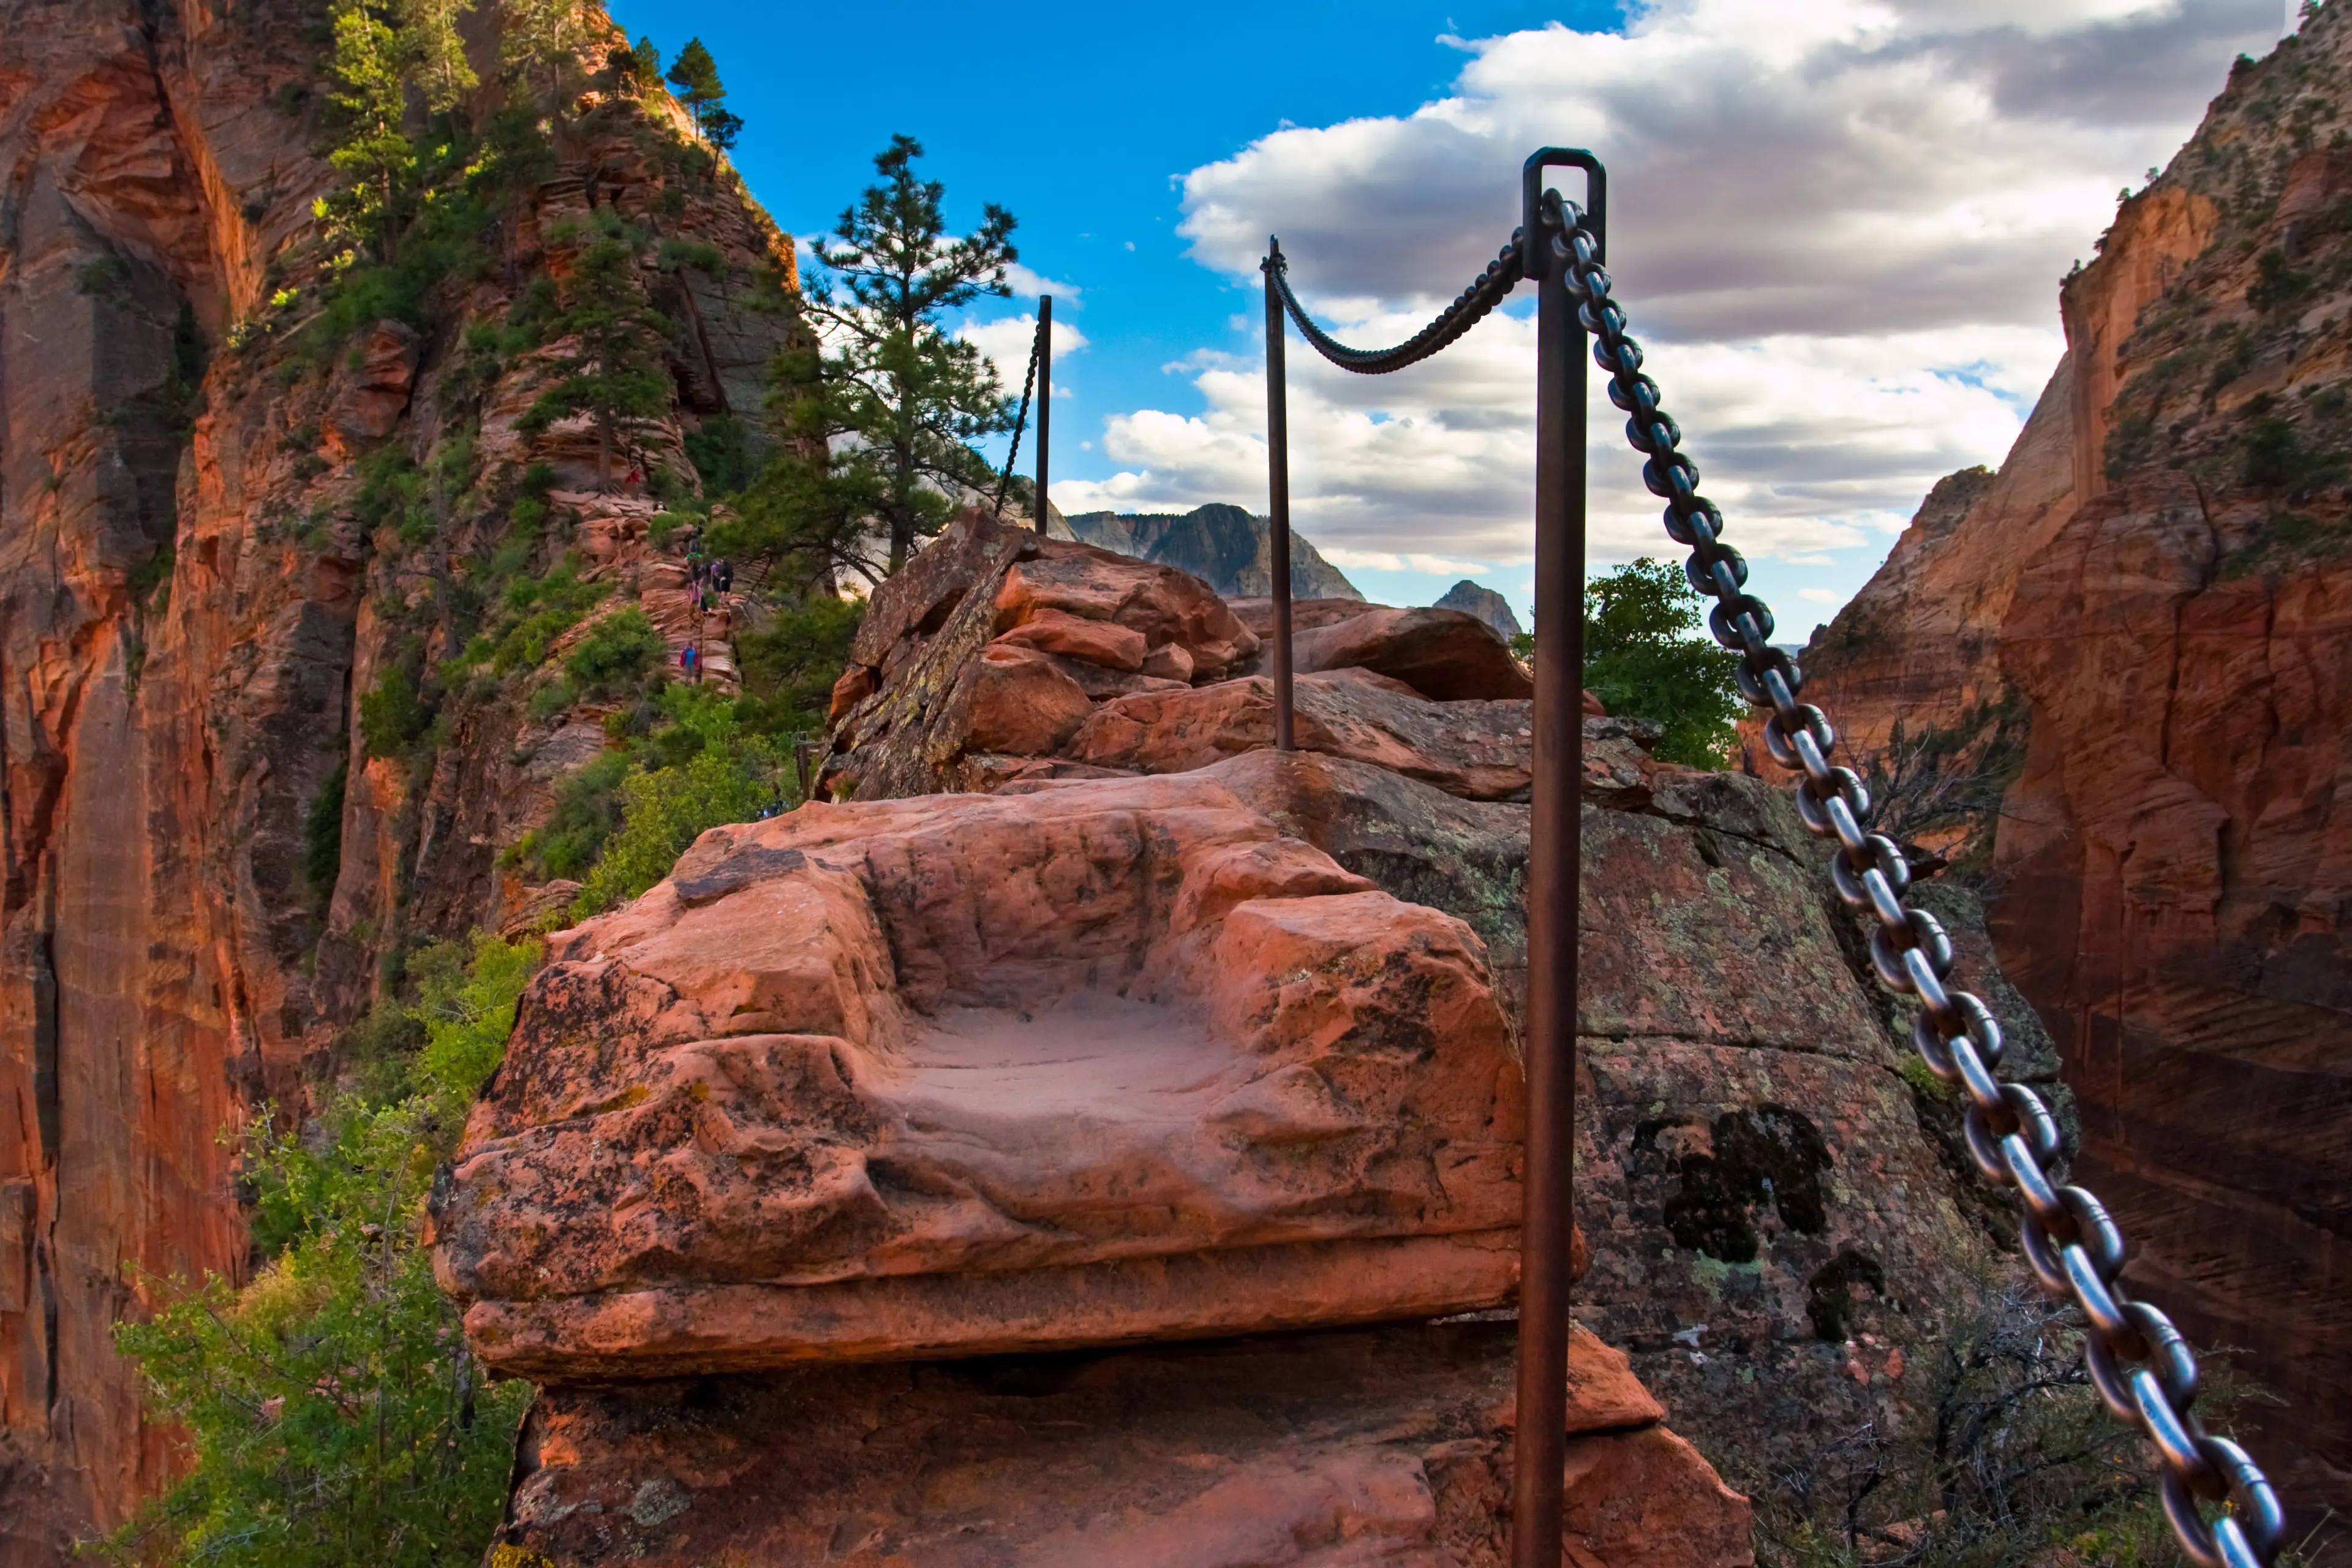 3-Day Local Adventure & Sightseeing Guide: Zion National Park